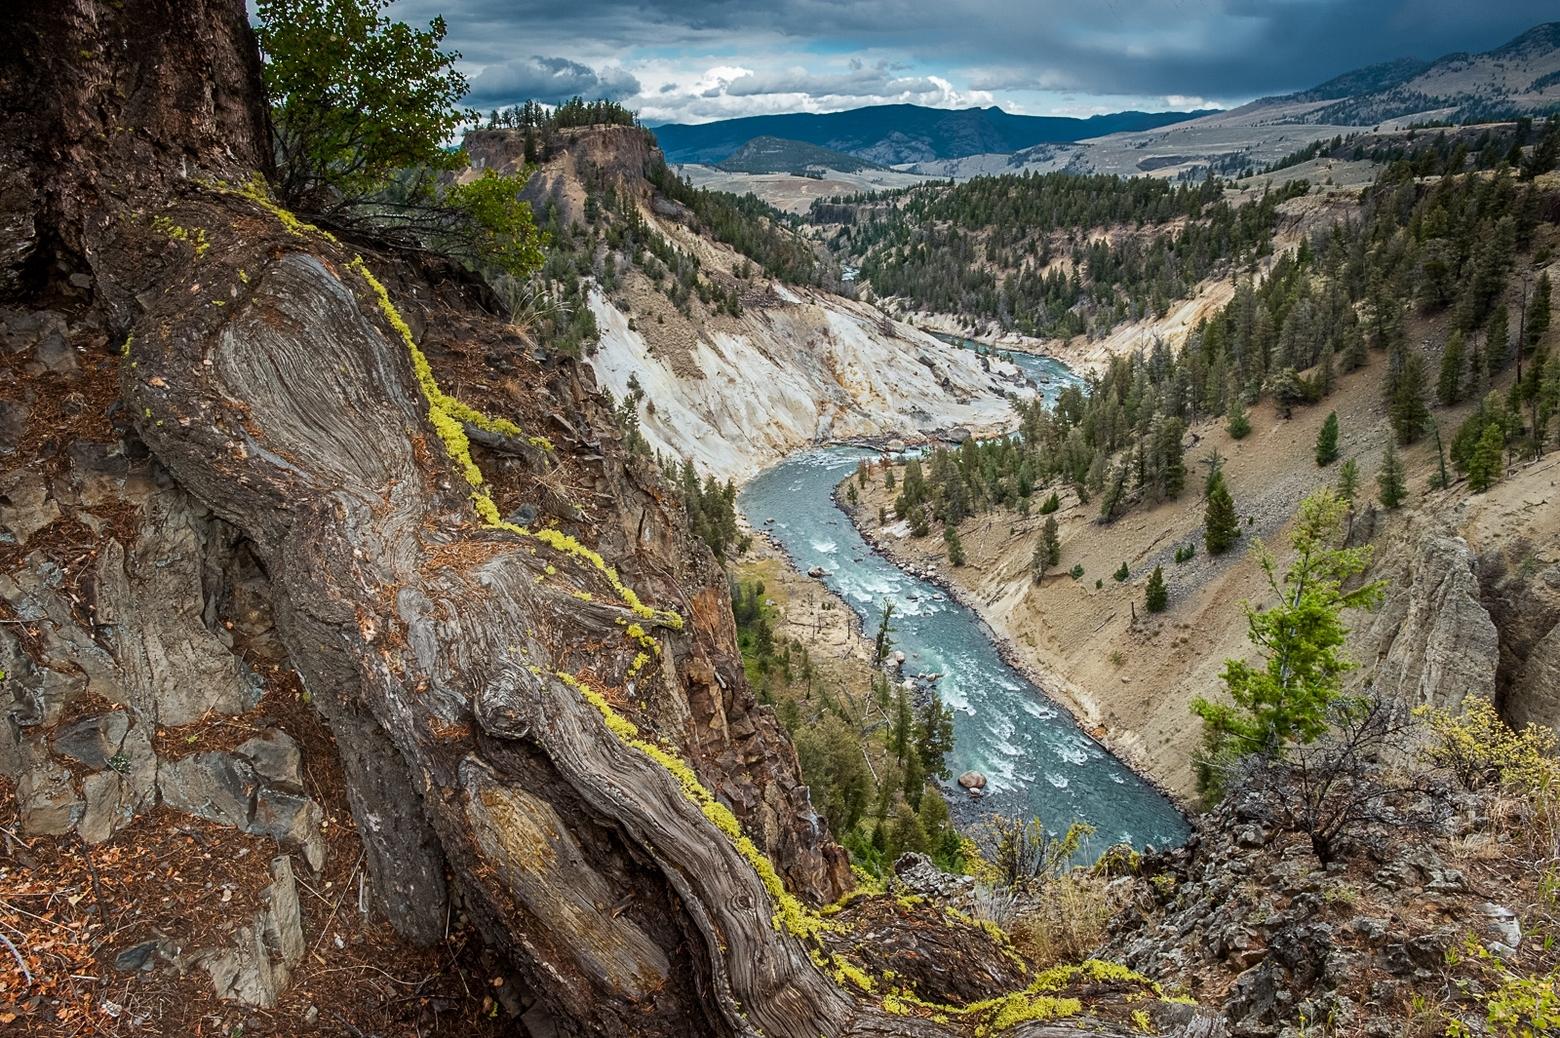 Calcite Springs Trail gives this classic western view of the Yellowstone River. The moss covered root diverted my attention from the thermal springs in the distance. Photo by Howie Garber